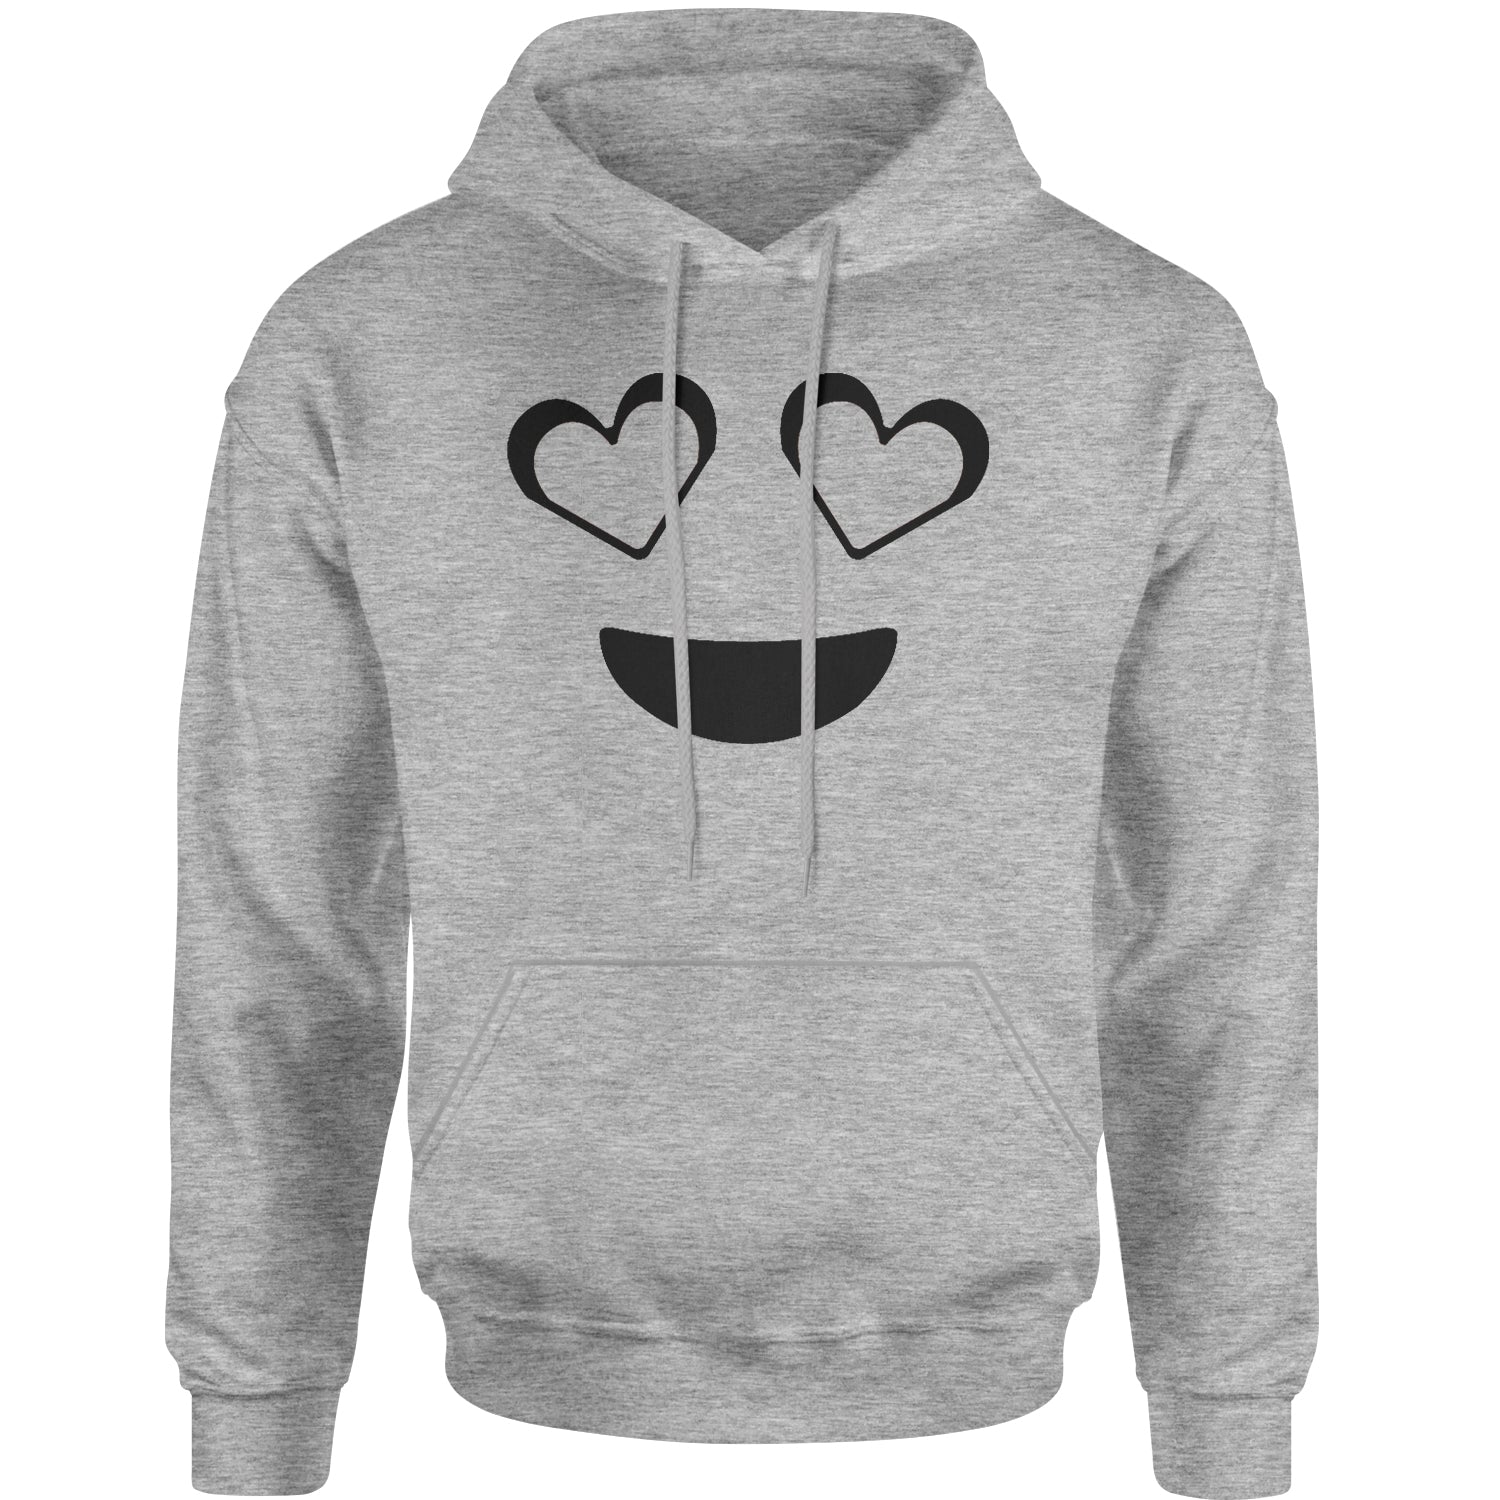 Emoticon Heart Eyes Smile Face Adult Hoodie Sweatshirt cosplay, costume, dress, emoji, emote, face, halloween, Smile, up, yellow by Expression Tees